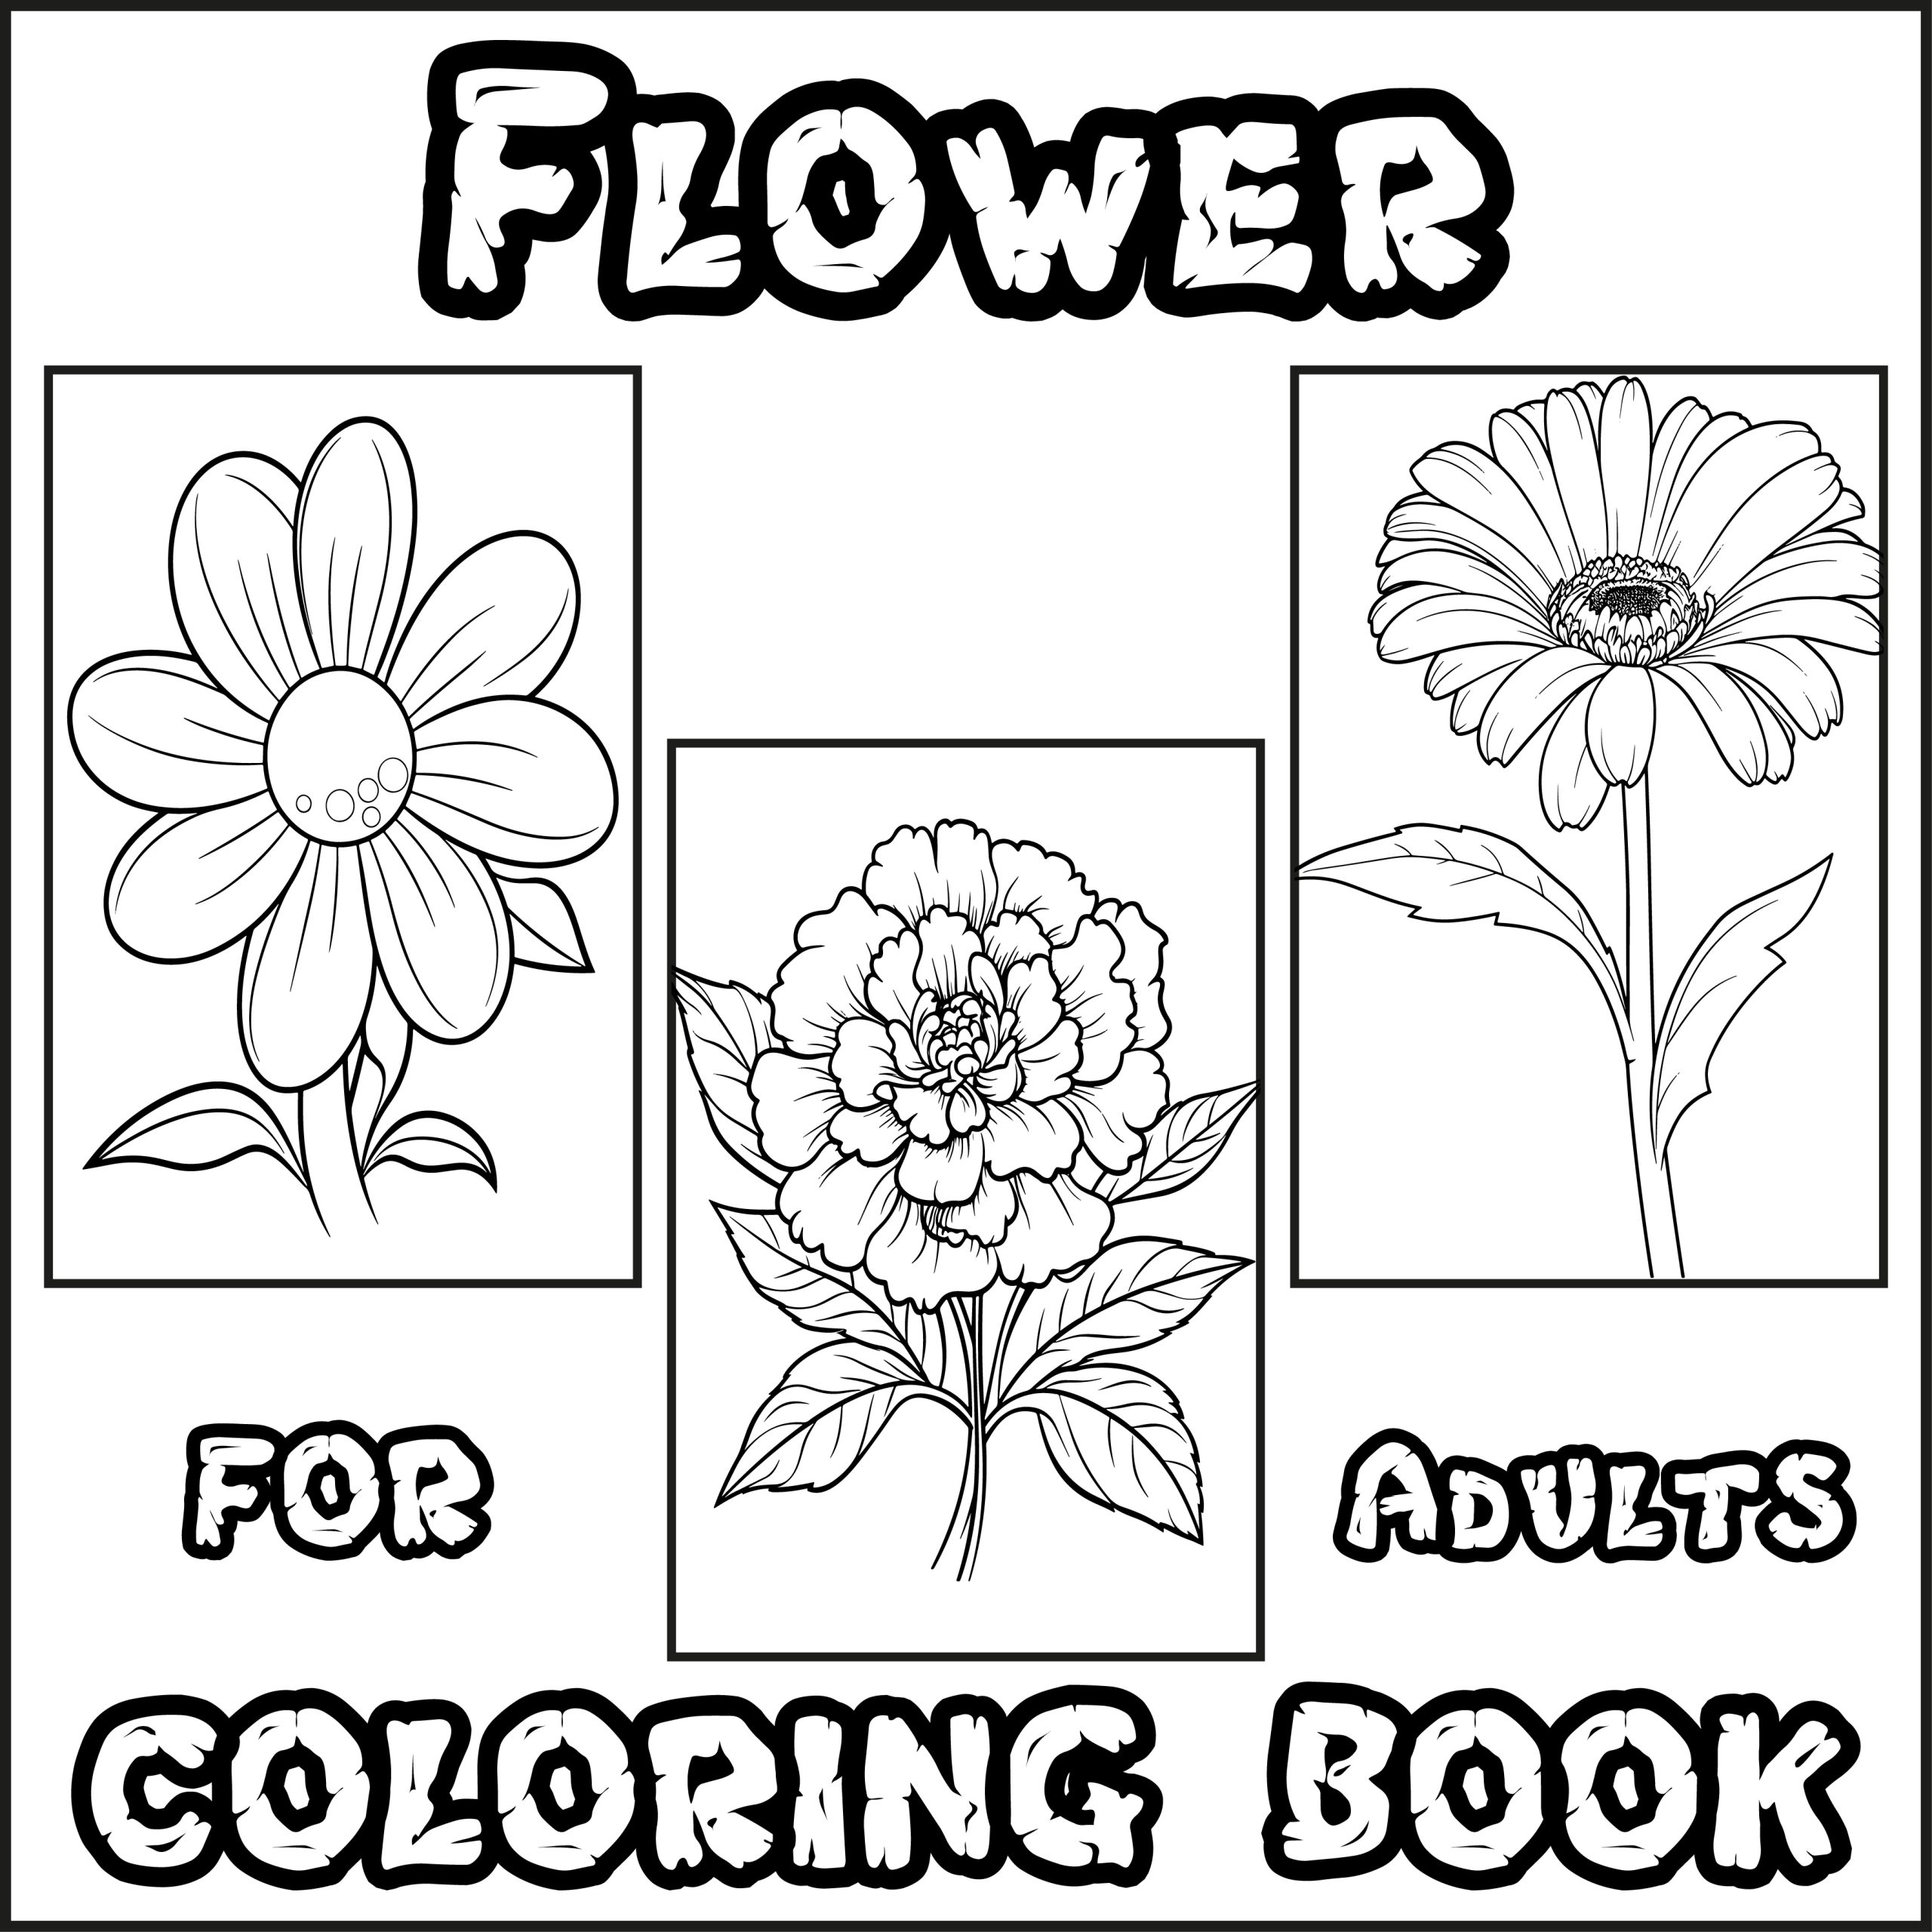 Flower coloring book for adults flower coloring pages for adults made by teachers